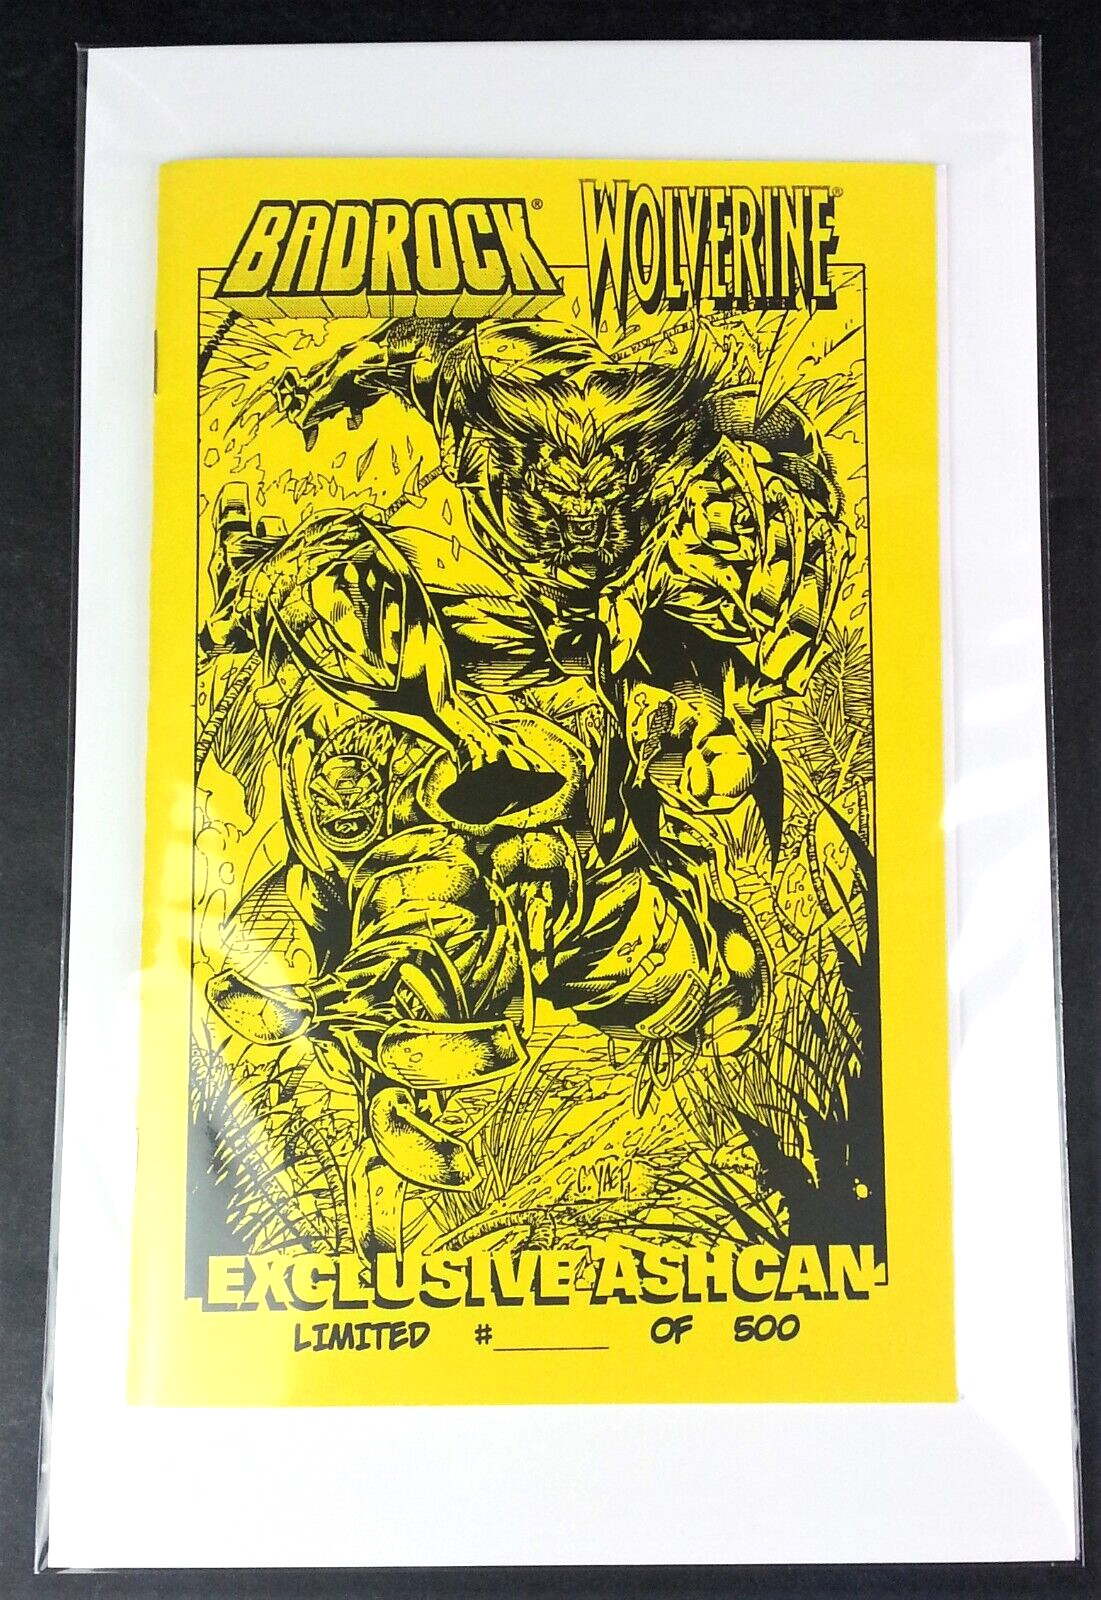 Badrock Wolverine Exclusive Ashcan 1996 Limited Edition #__/500 Yellow Cover